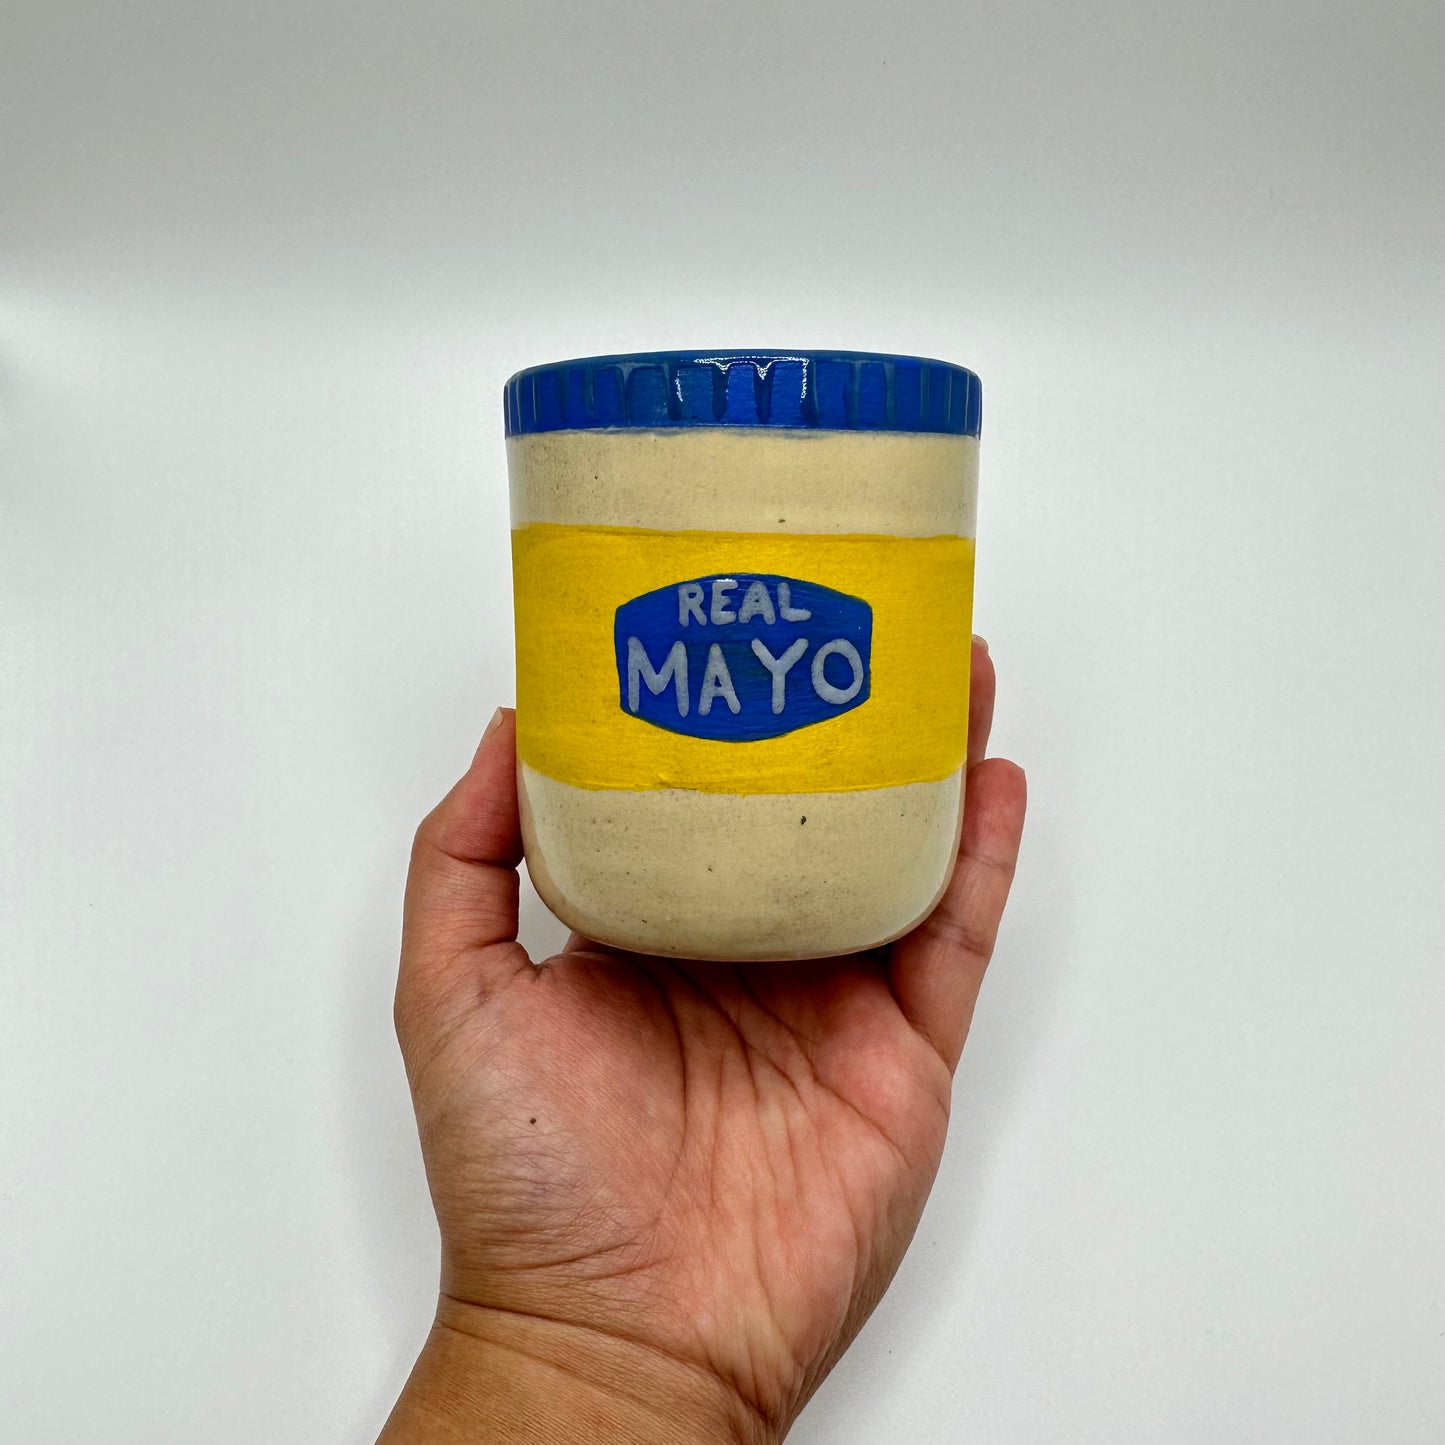 Ceramic tumbler hand painted to look like a jar of "Real May" with a blue lid.